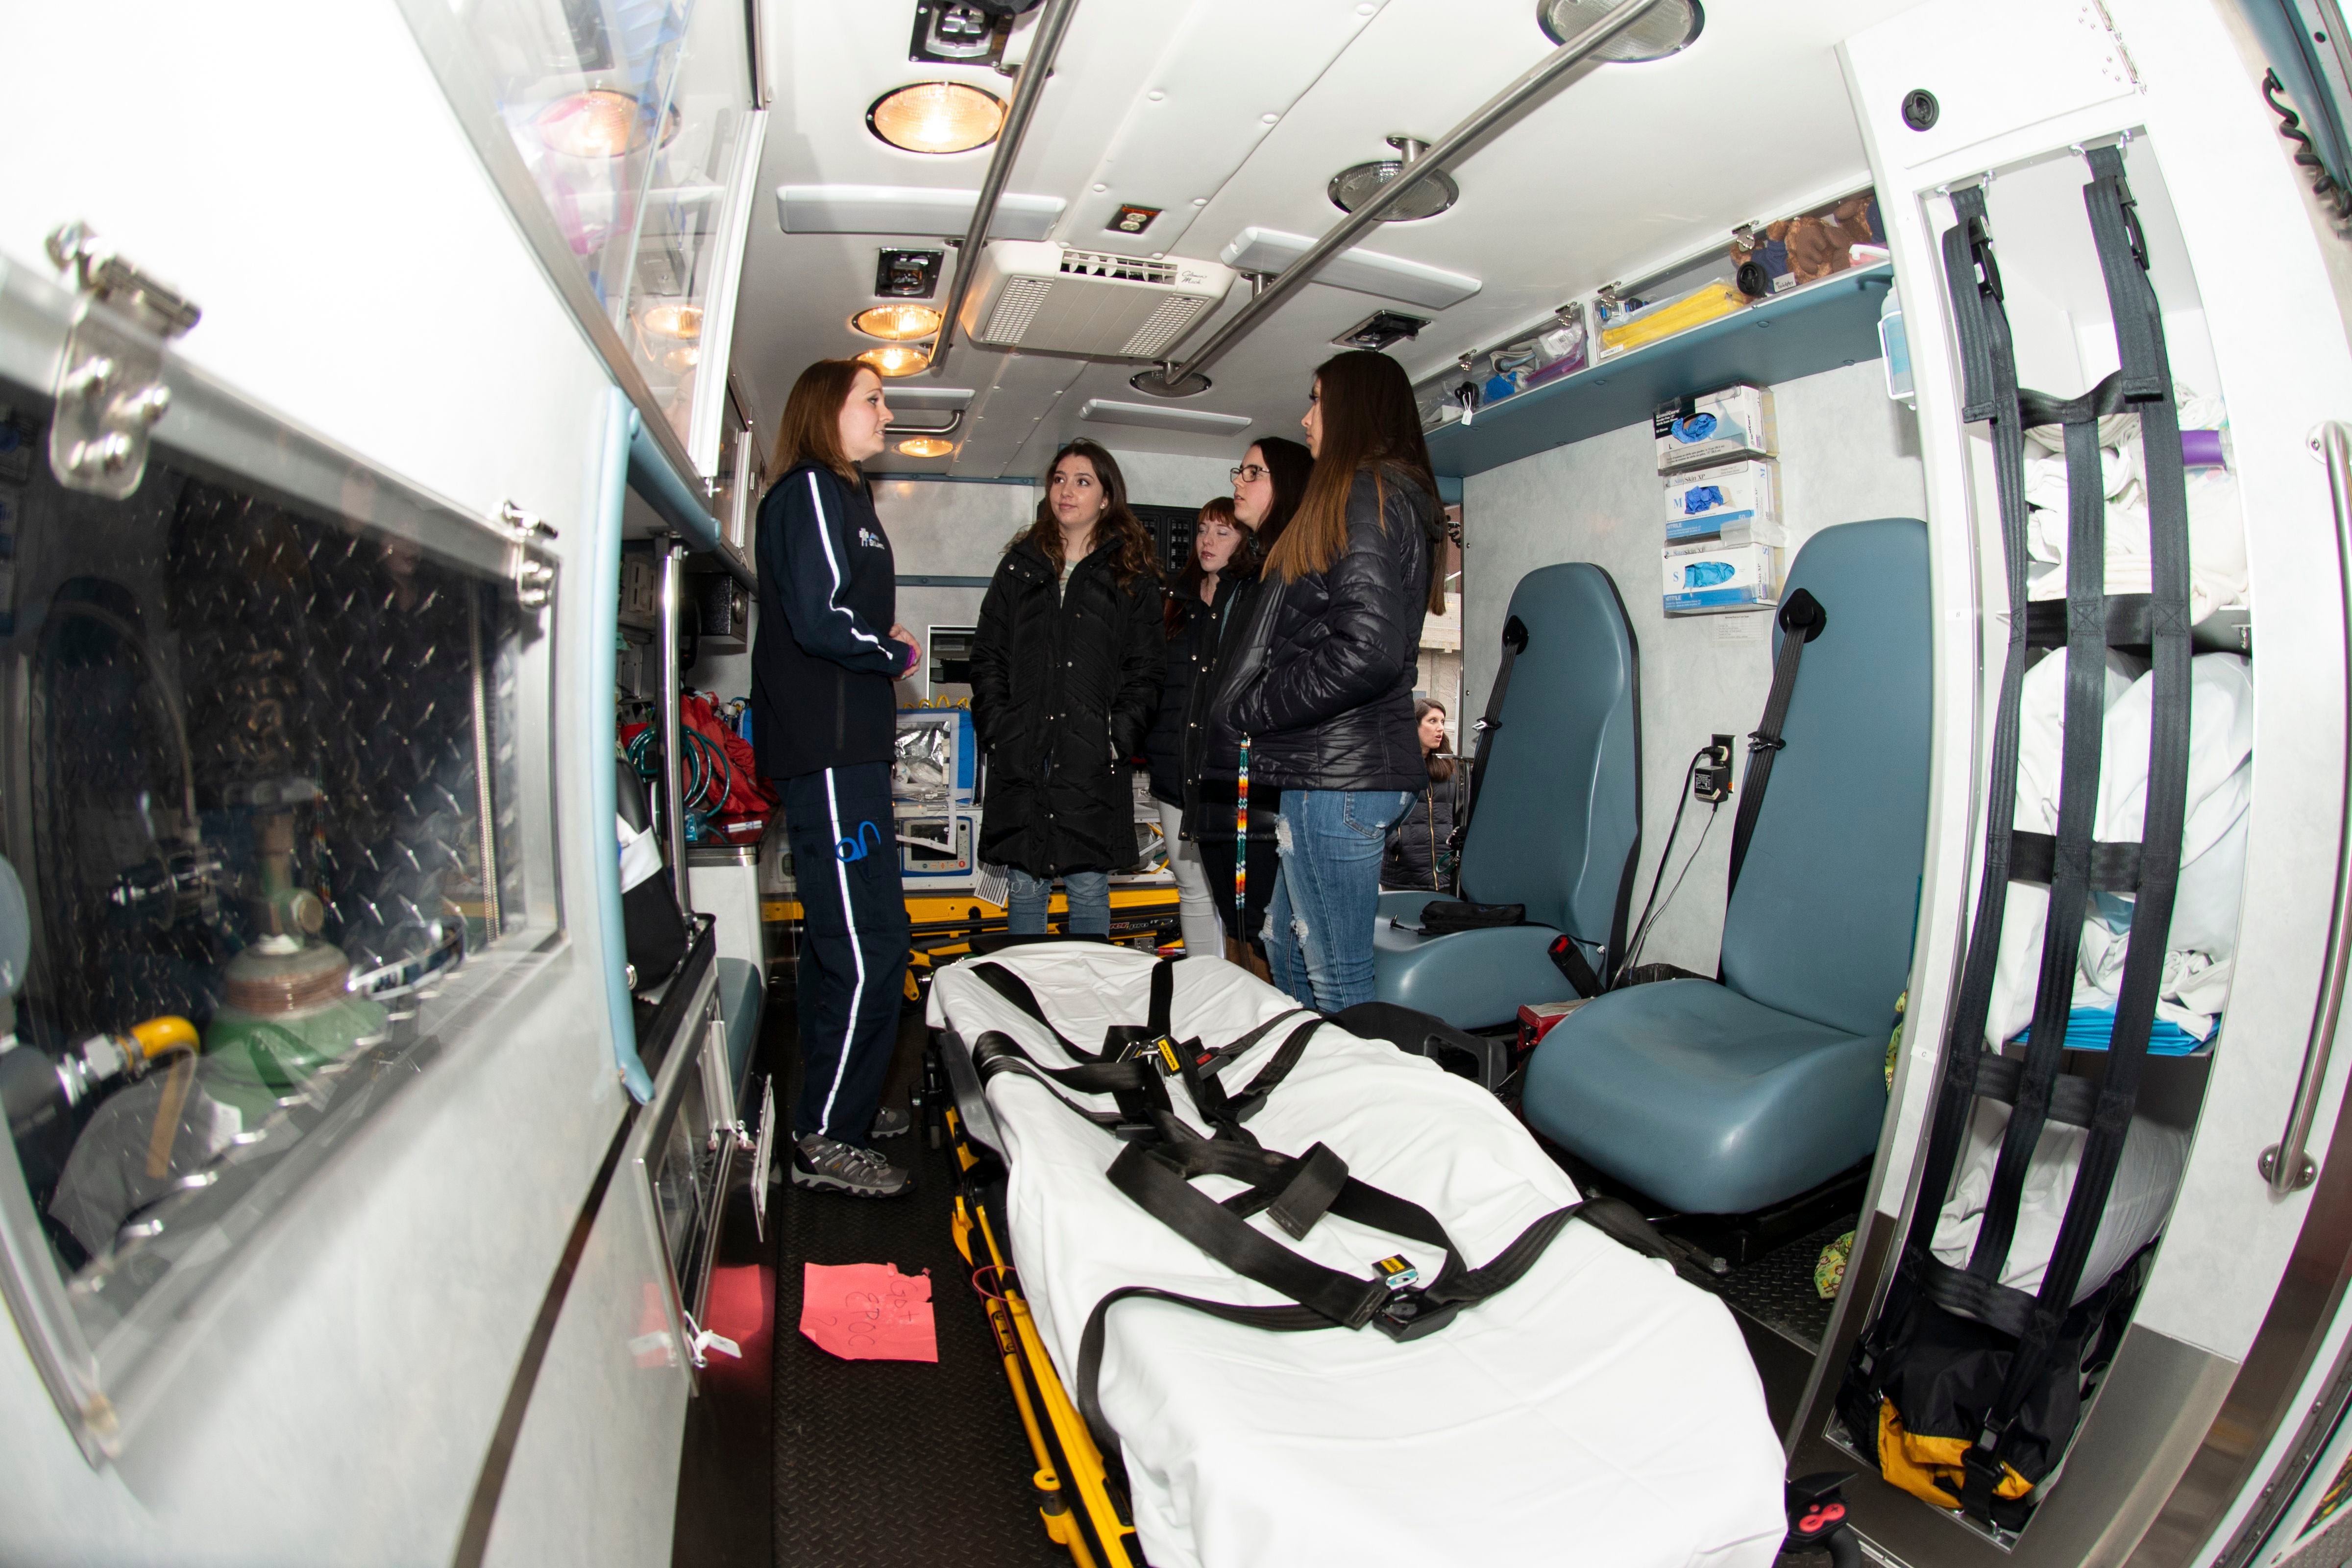 Air St. Luke's brought an ambulance to campus for the students of the Health Professions Living and Learning Community to learn about first responders' jobs and lives, Allison Corona photo